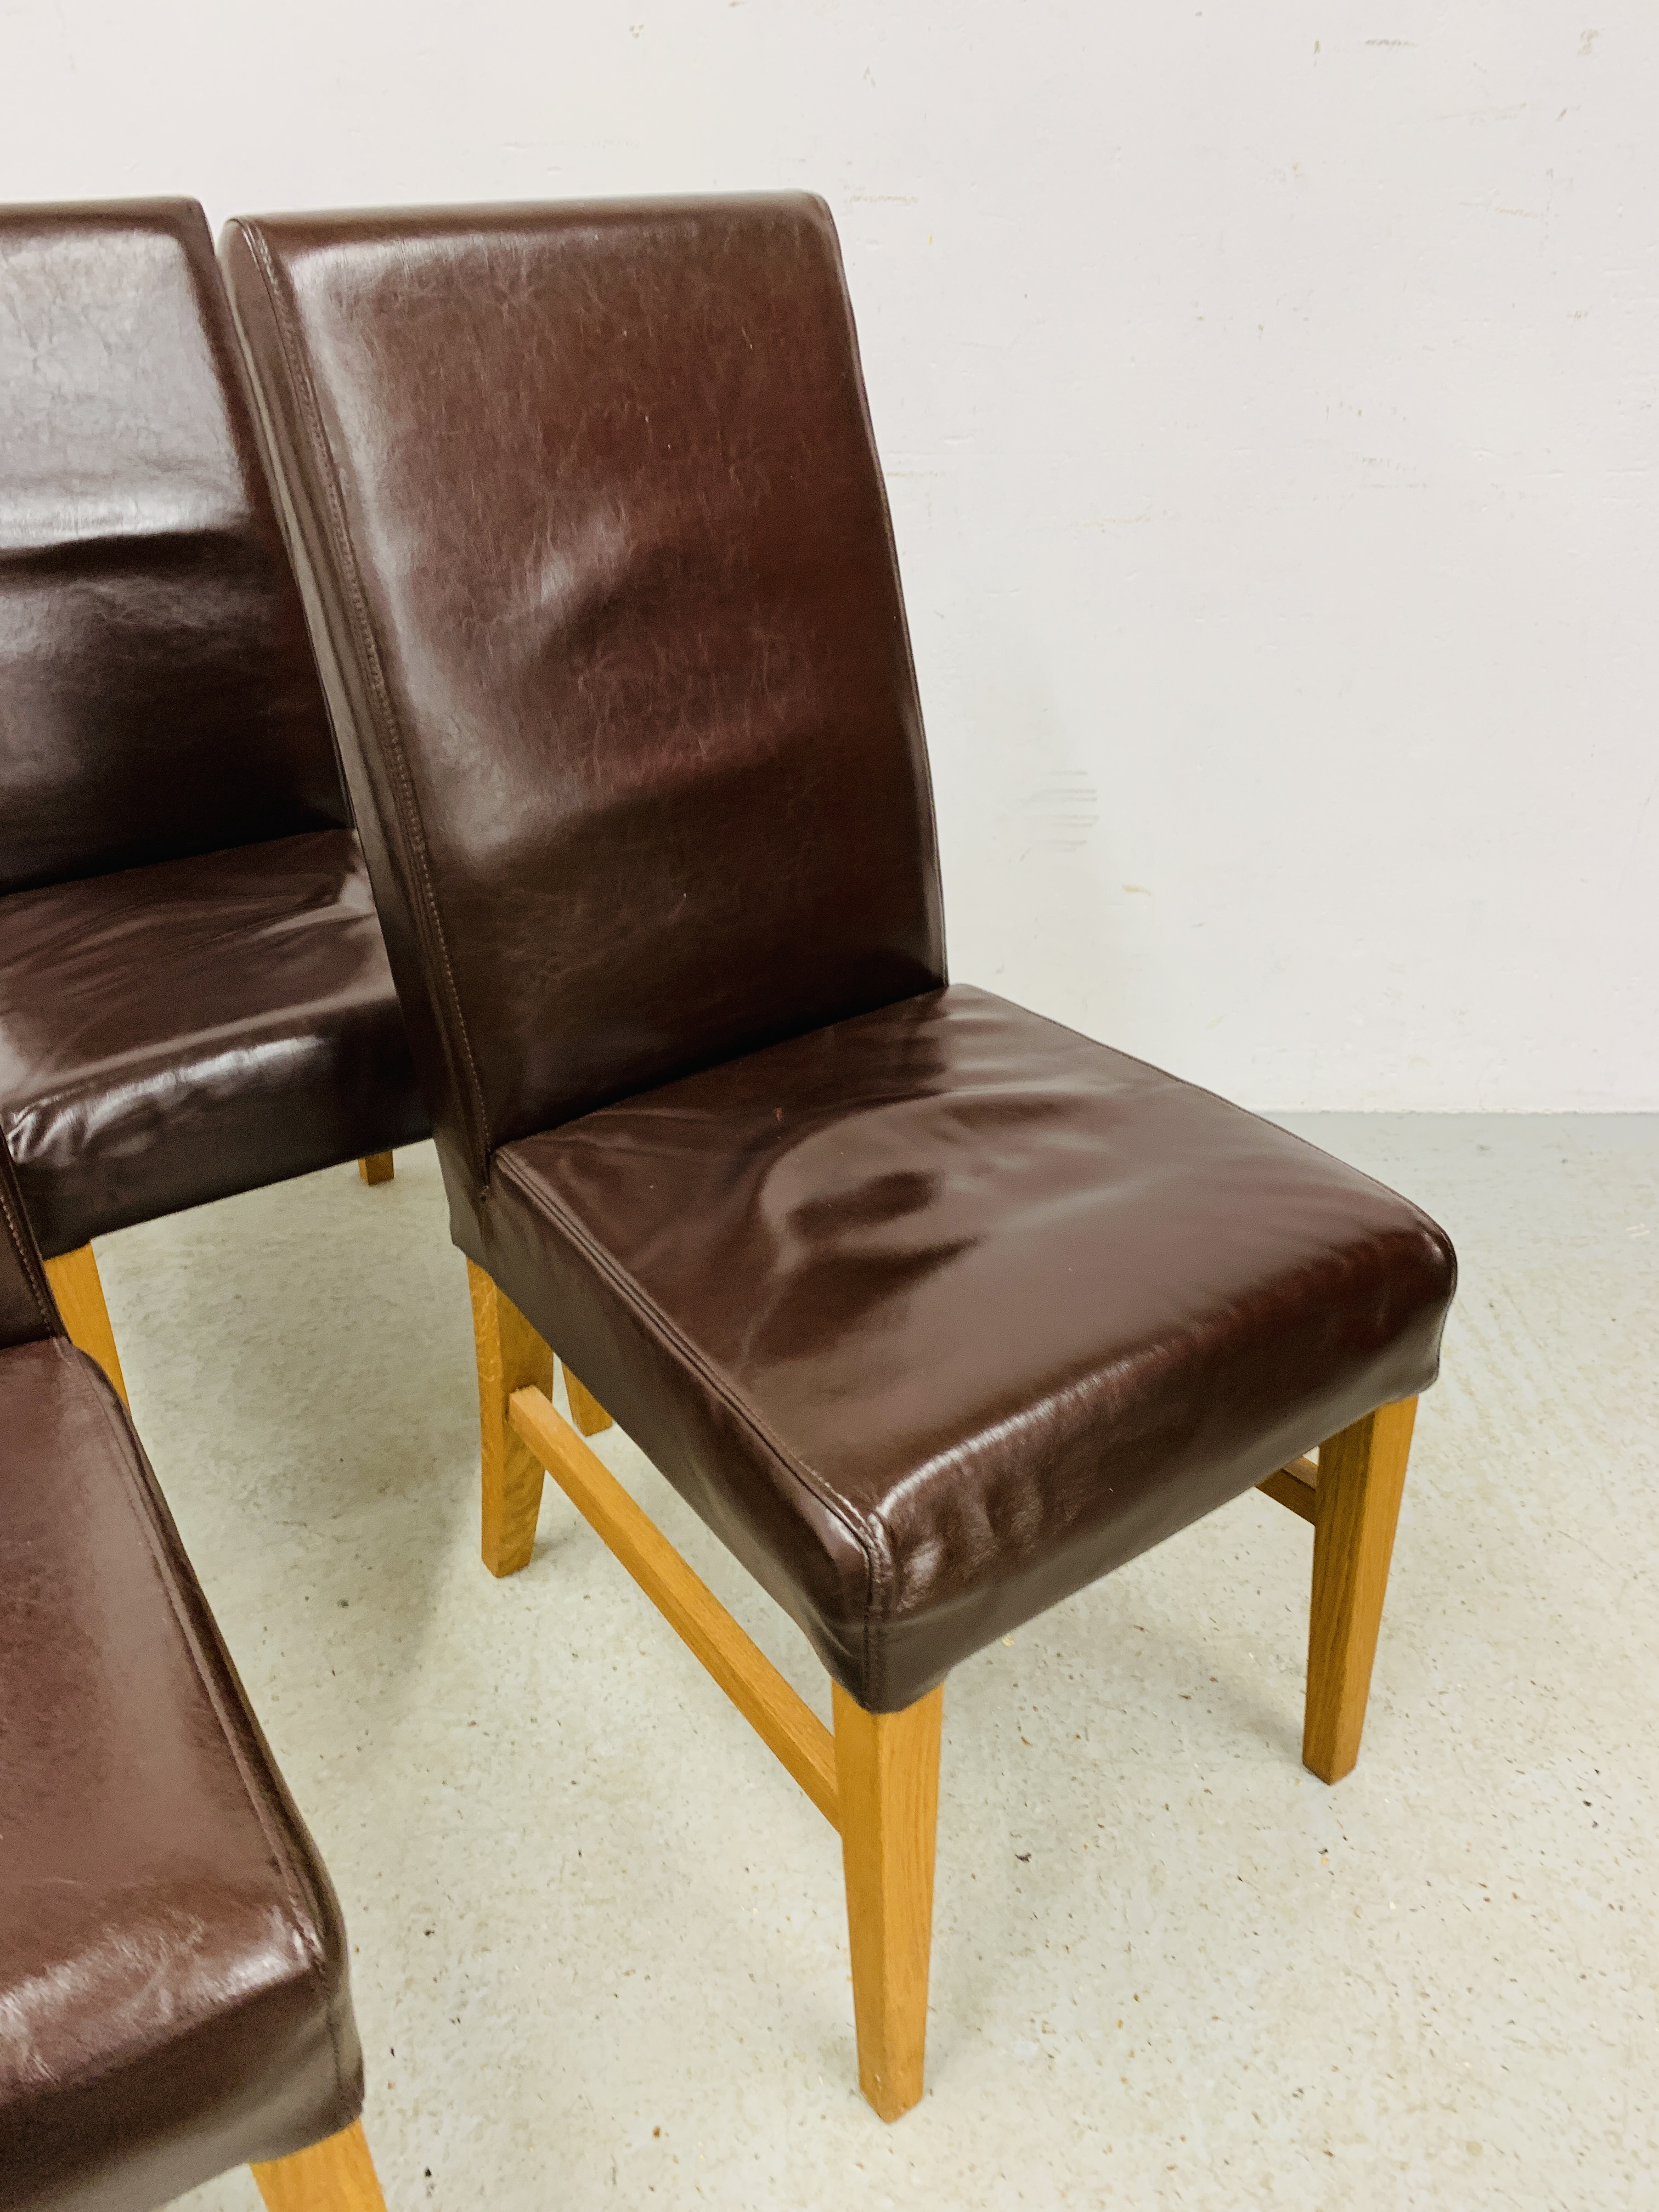 SET OF 4 BROWN FAUX LEATHER DINING CHAIRS - Image 4 of 7